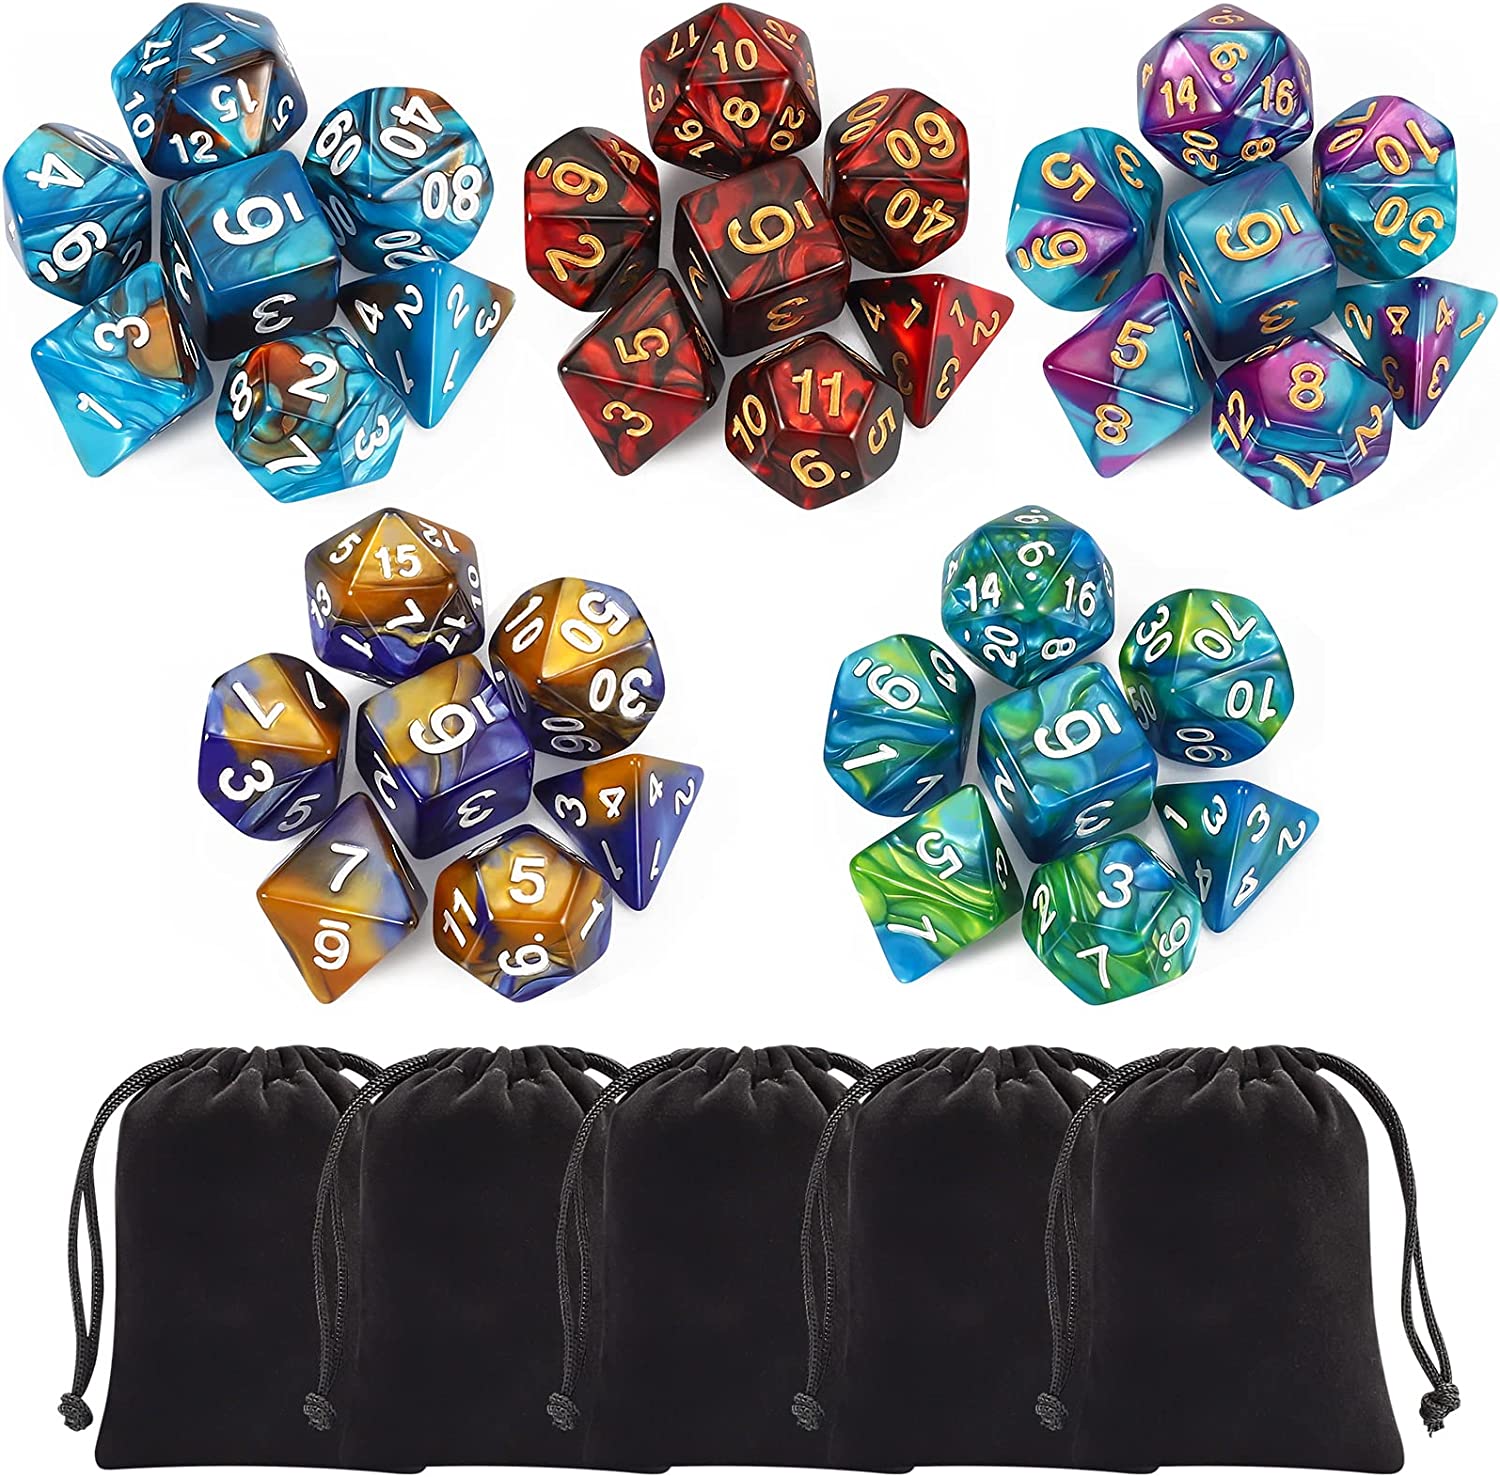 CiaraQ Polyhedral Dice Set (35 Pieces) with Black [...]